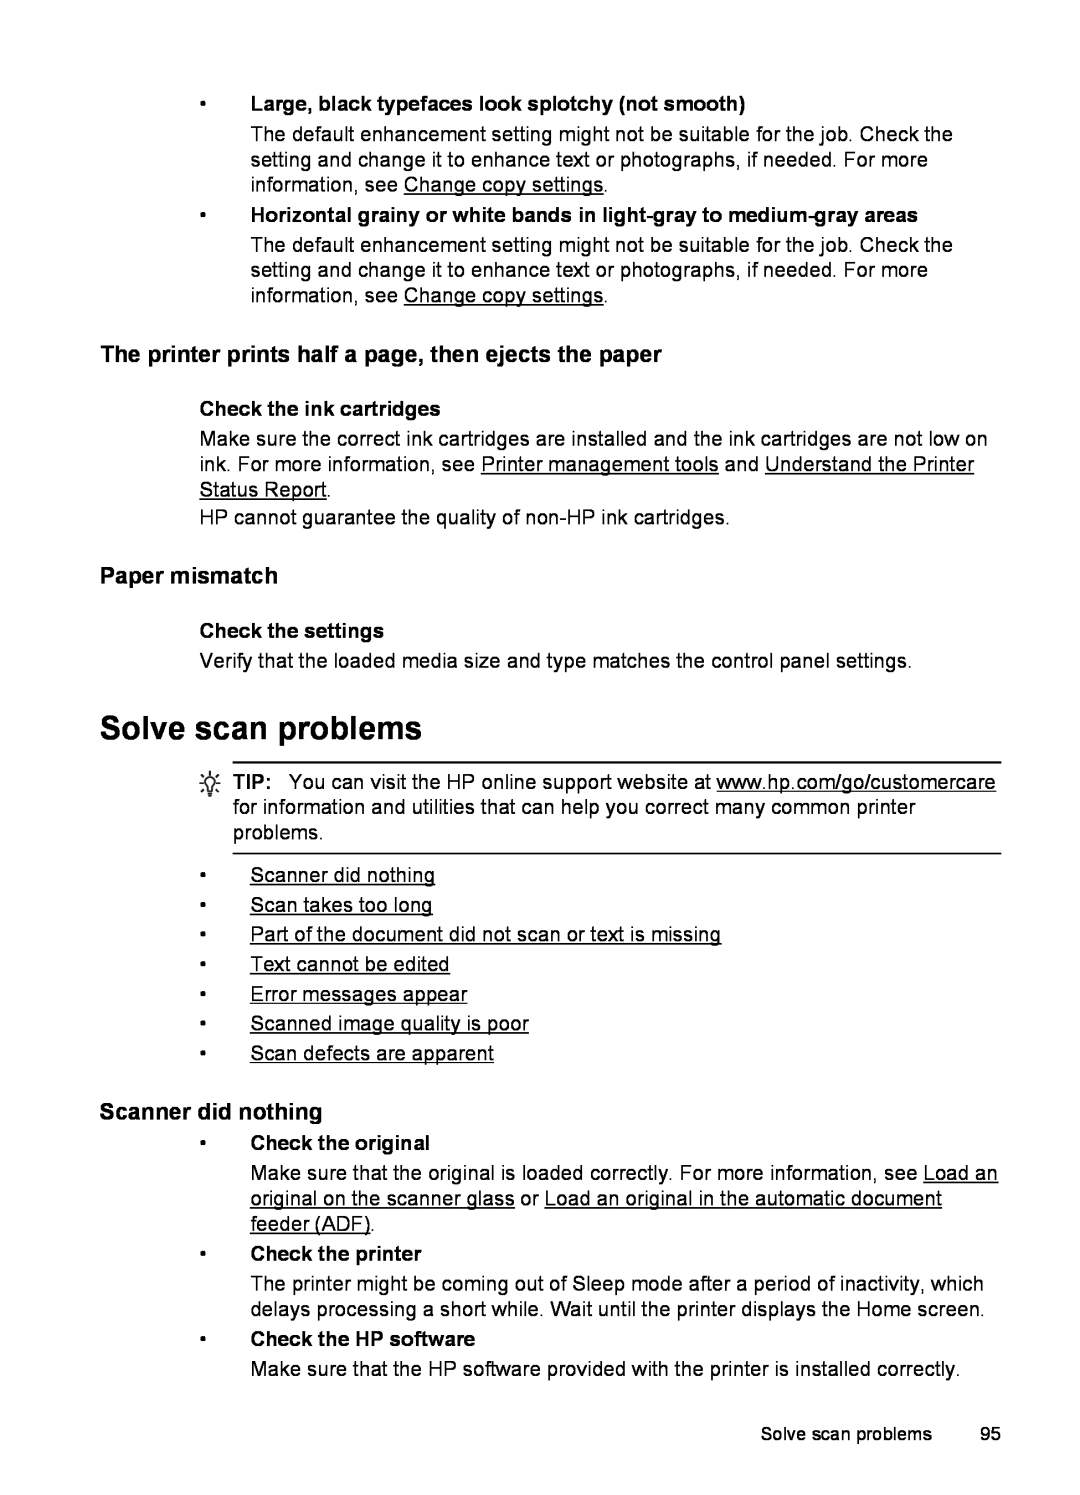 HP 6600 - H7 Solve scan problems, The printer prints half a page, then ejects the paper, Paper mismatch, Check the printer 